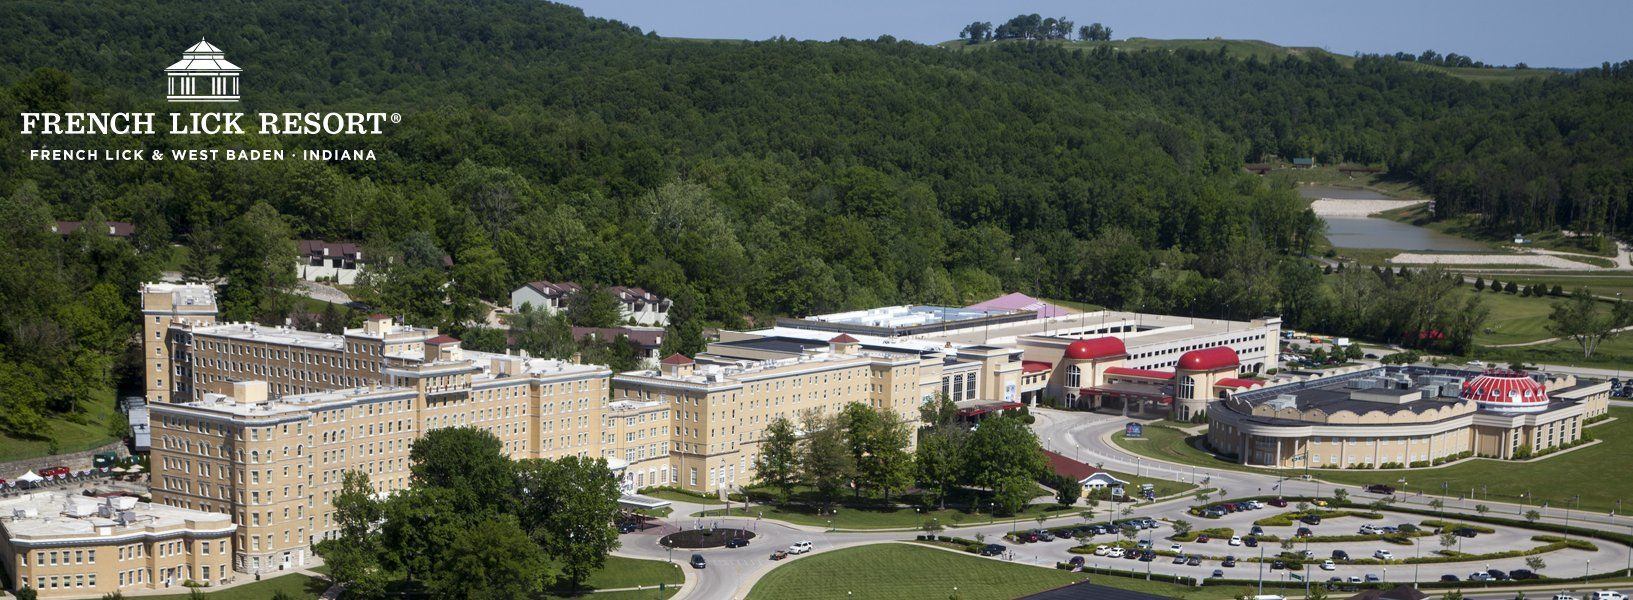 Discount rates for french lick resort